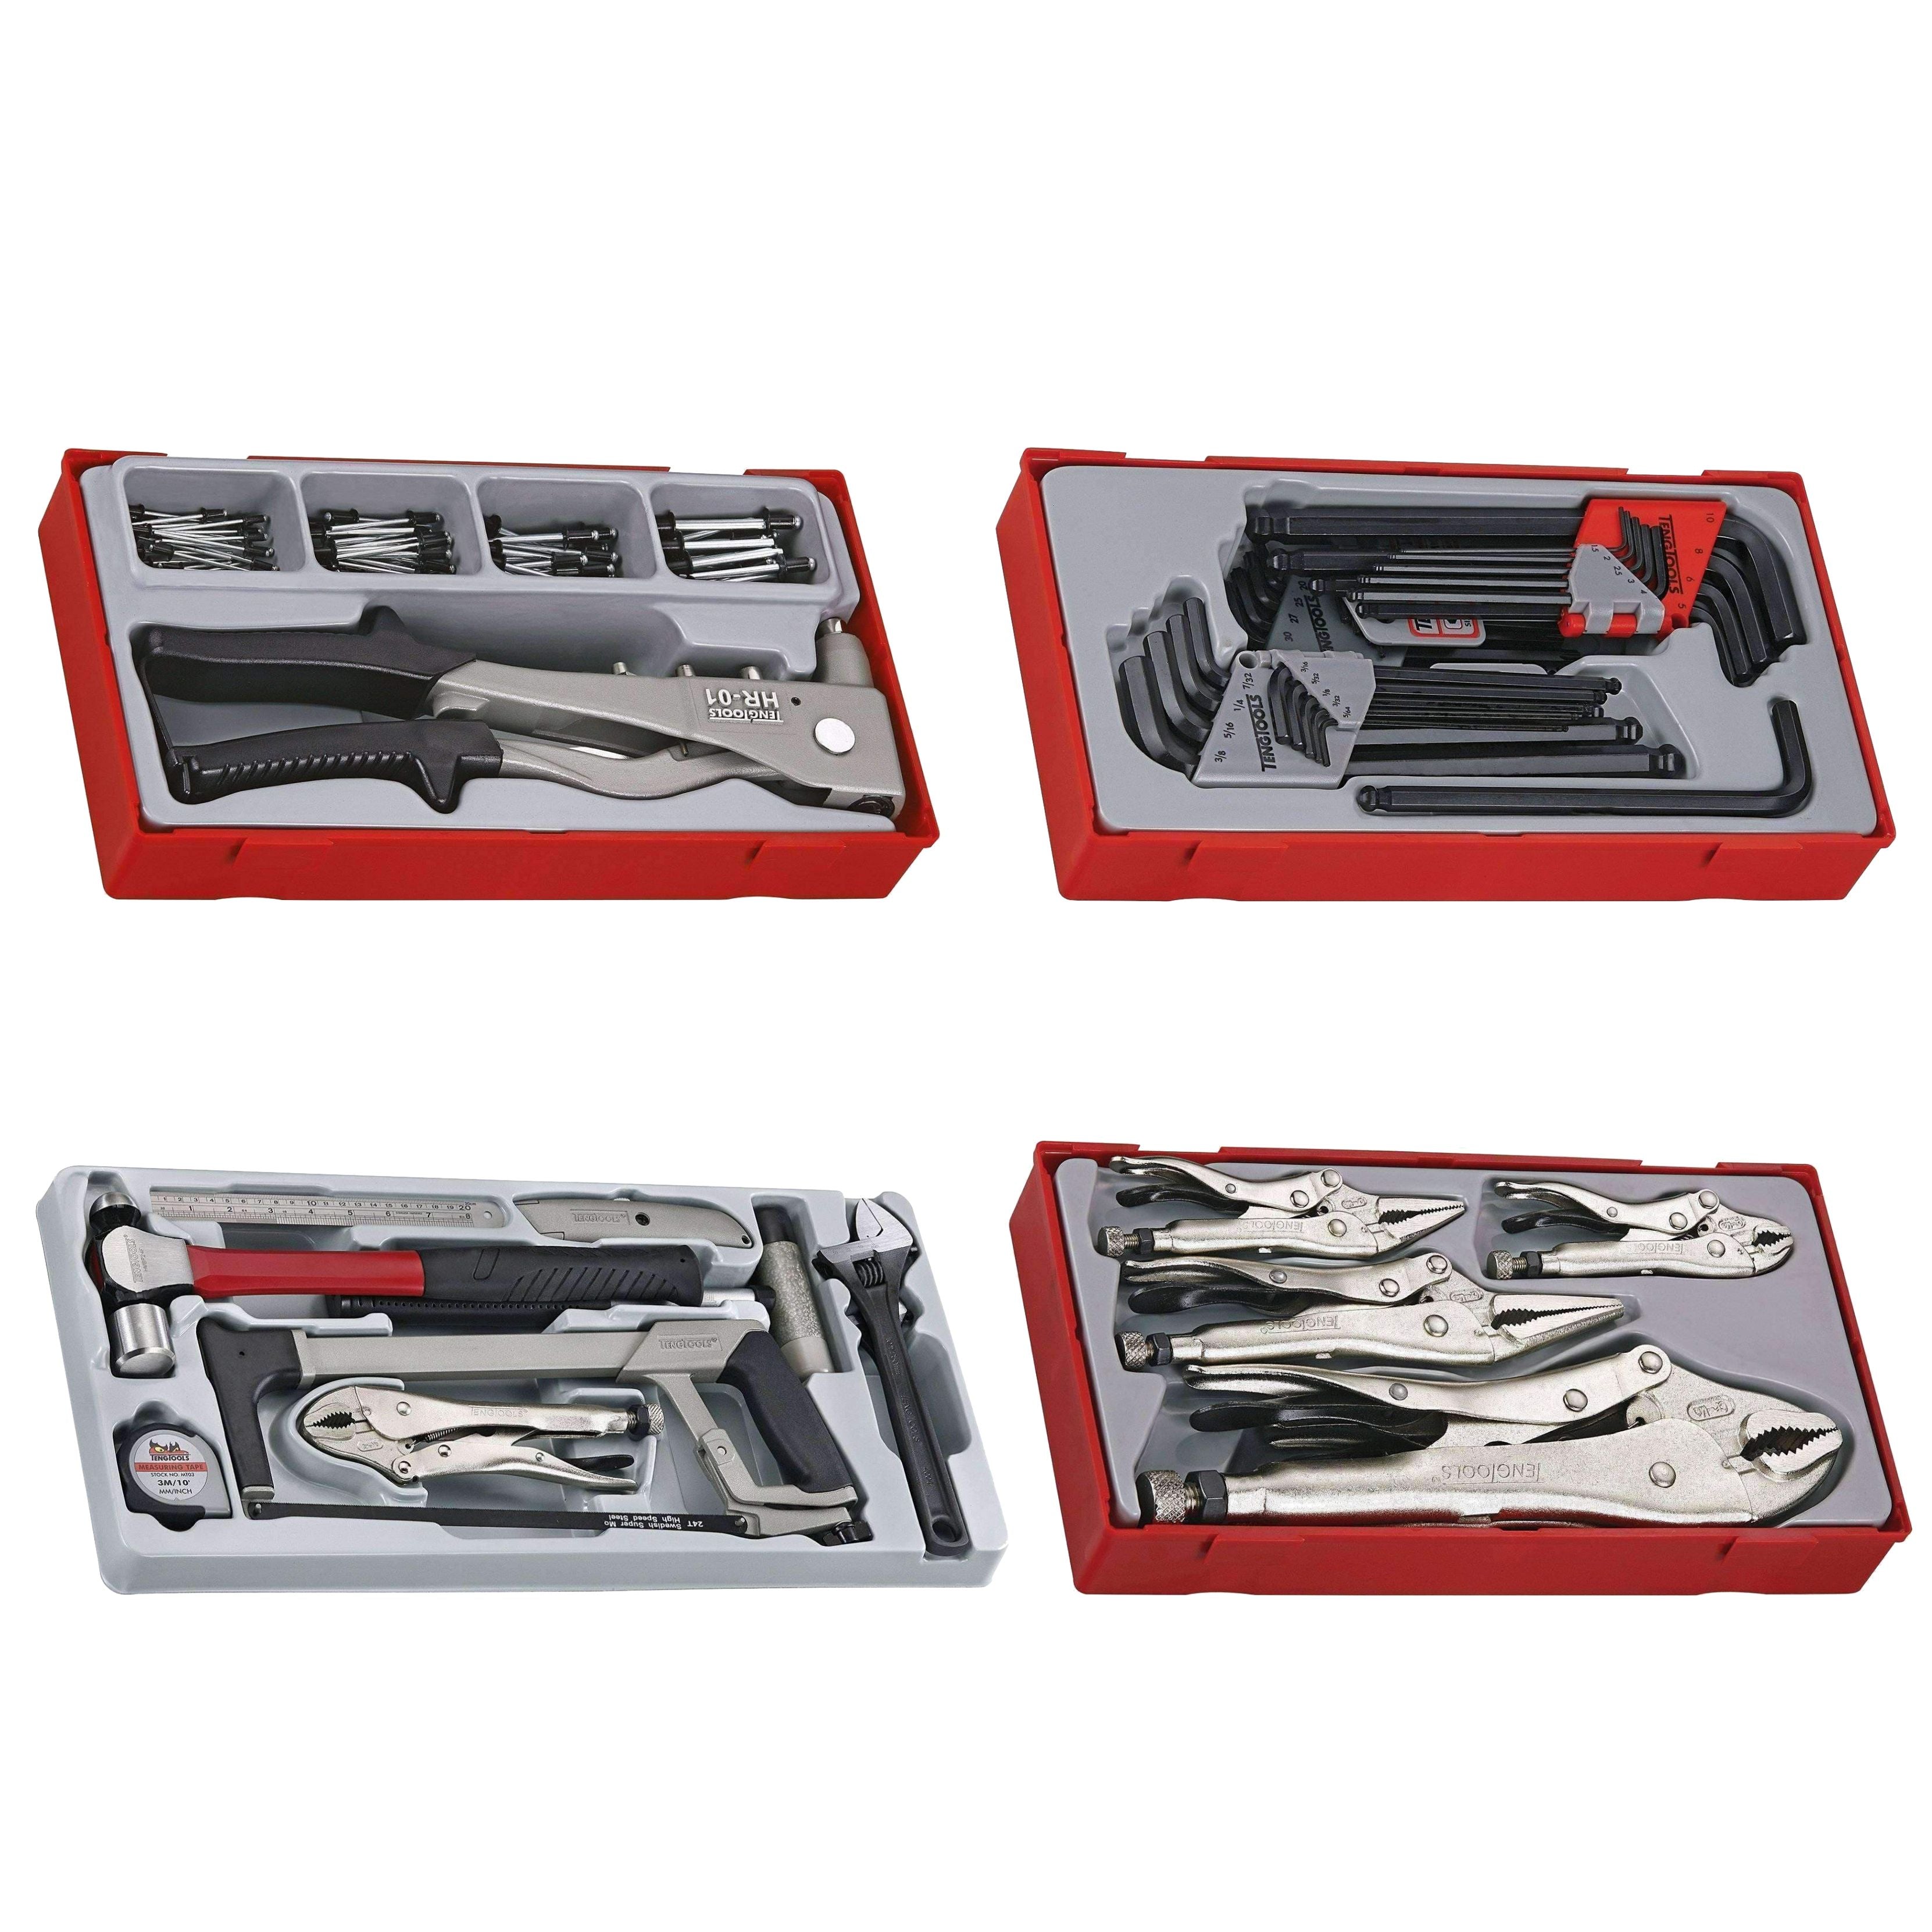 Teng Tools 10 and 12 inch Flat Jaw Power Vise Grip Locking Pliers - 10 inch